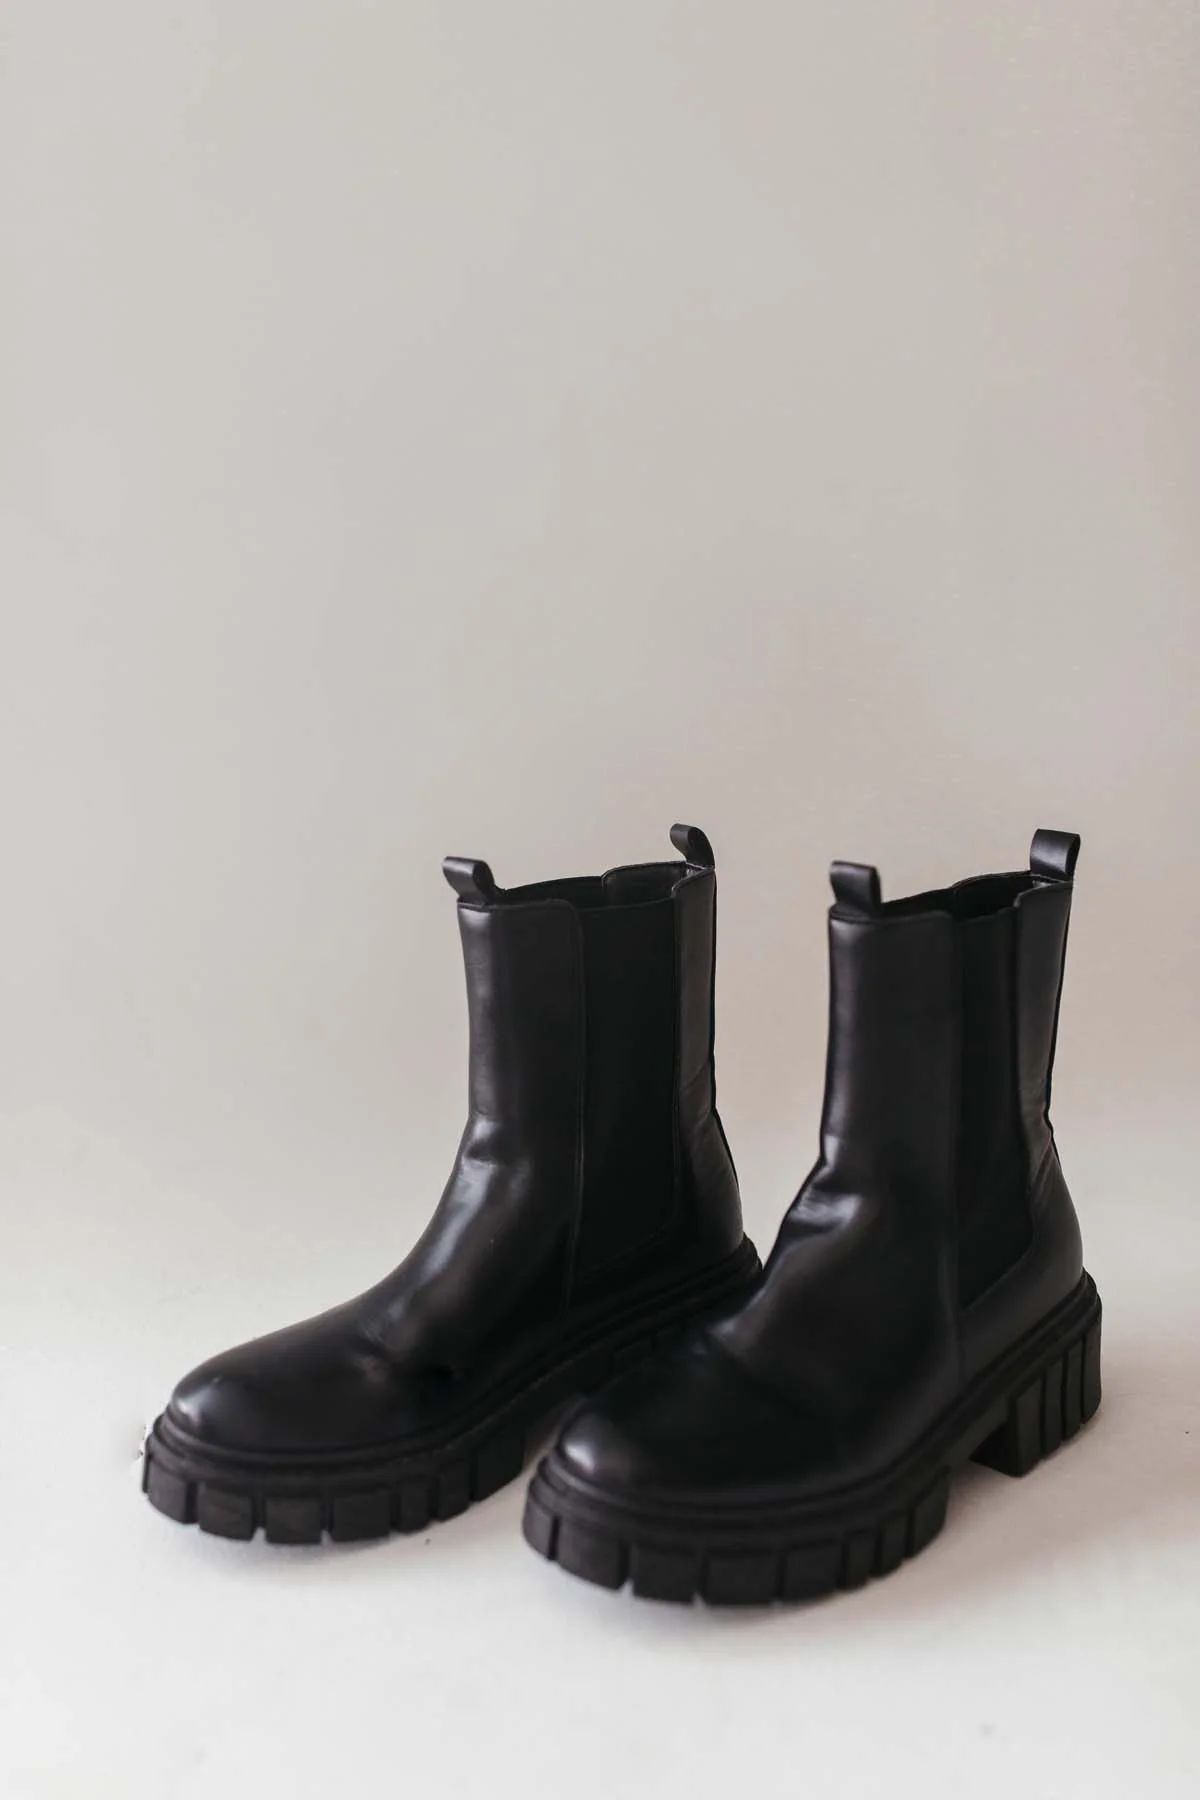 RESTOCK - Hollie Lug Boots | The Post